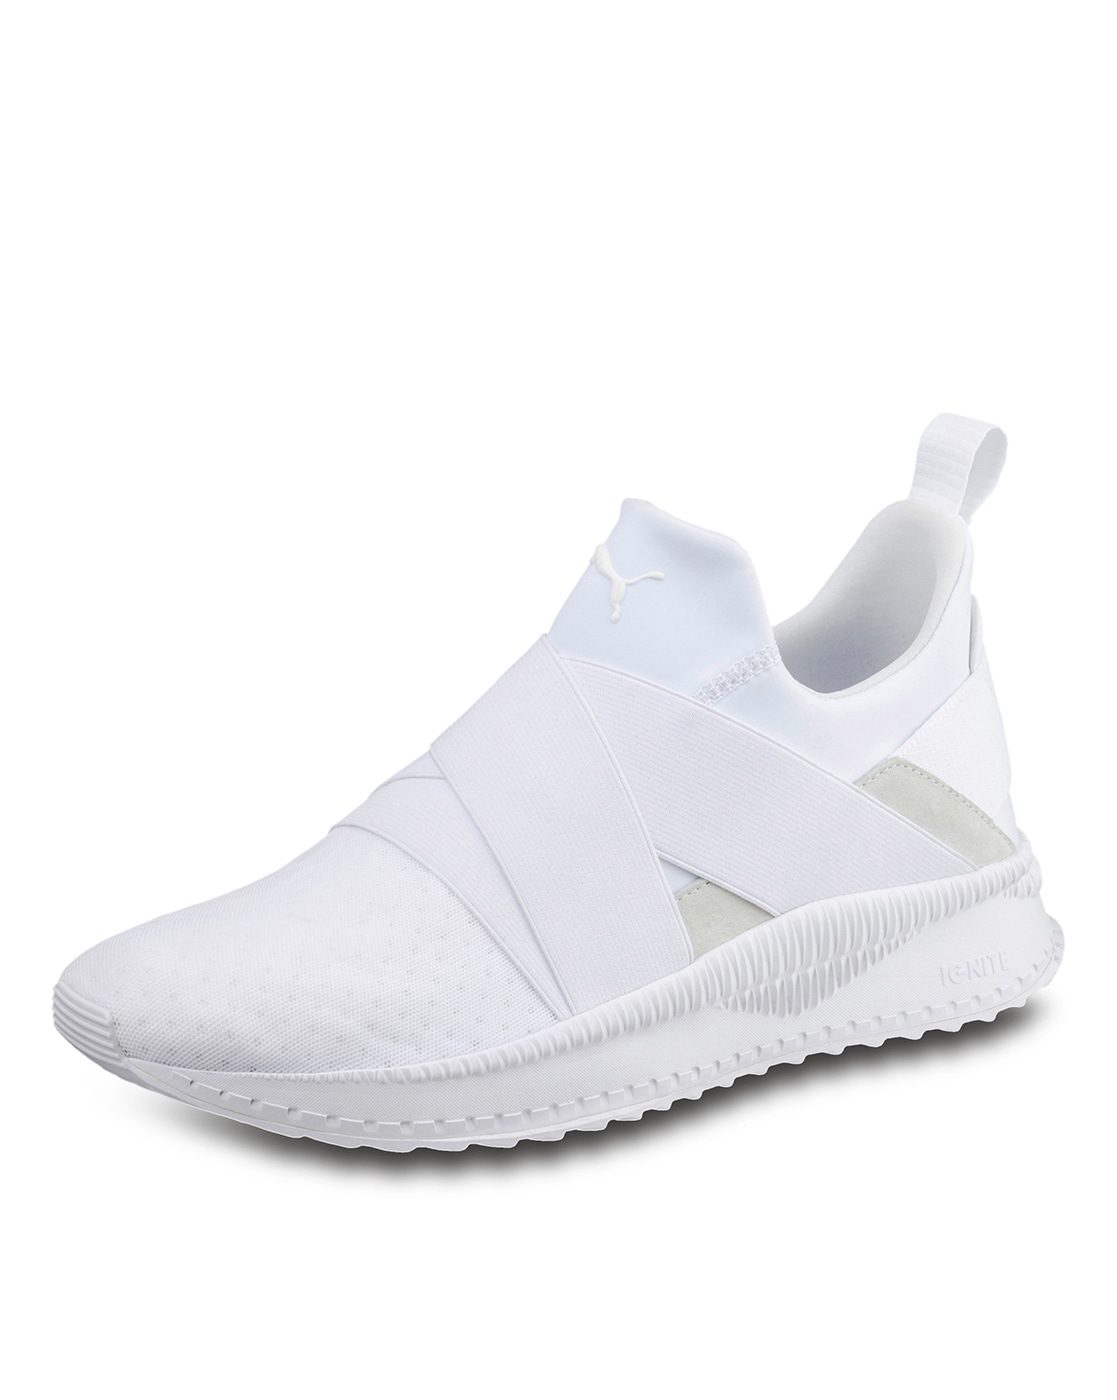 Buy White Casual Shoes for Men by Puma 